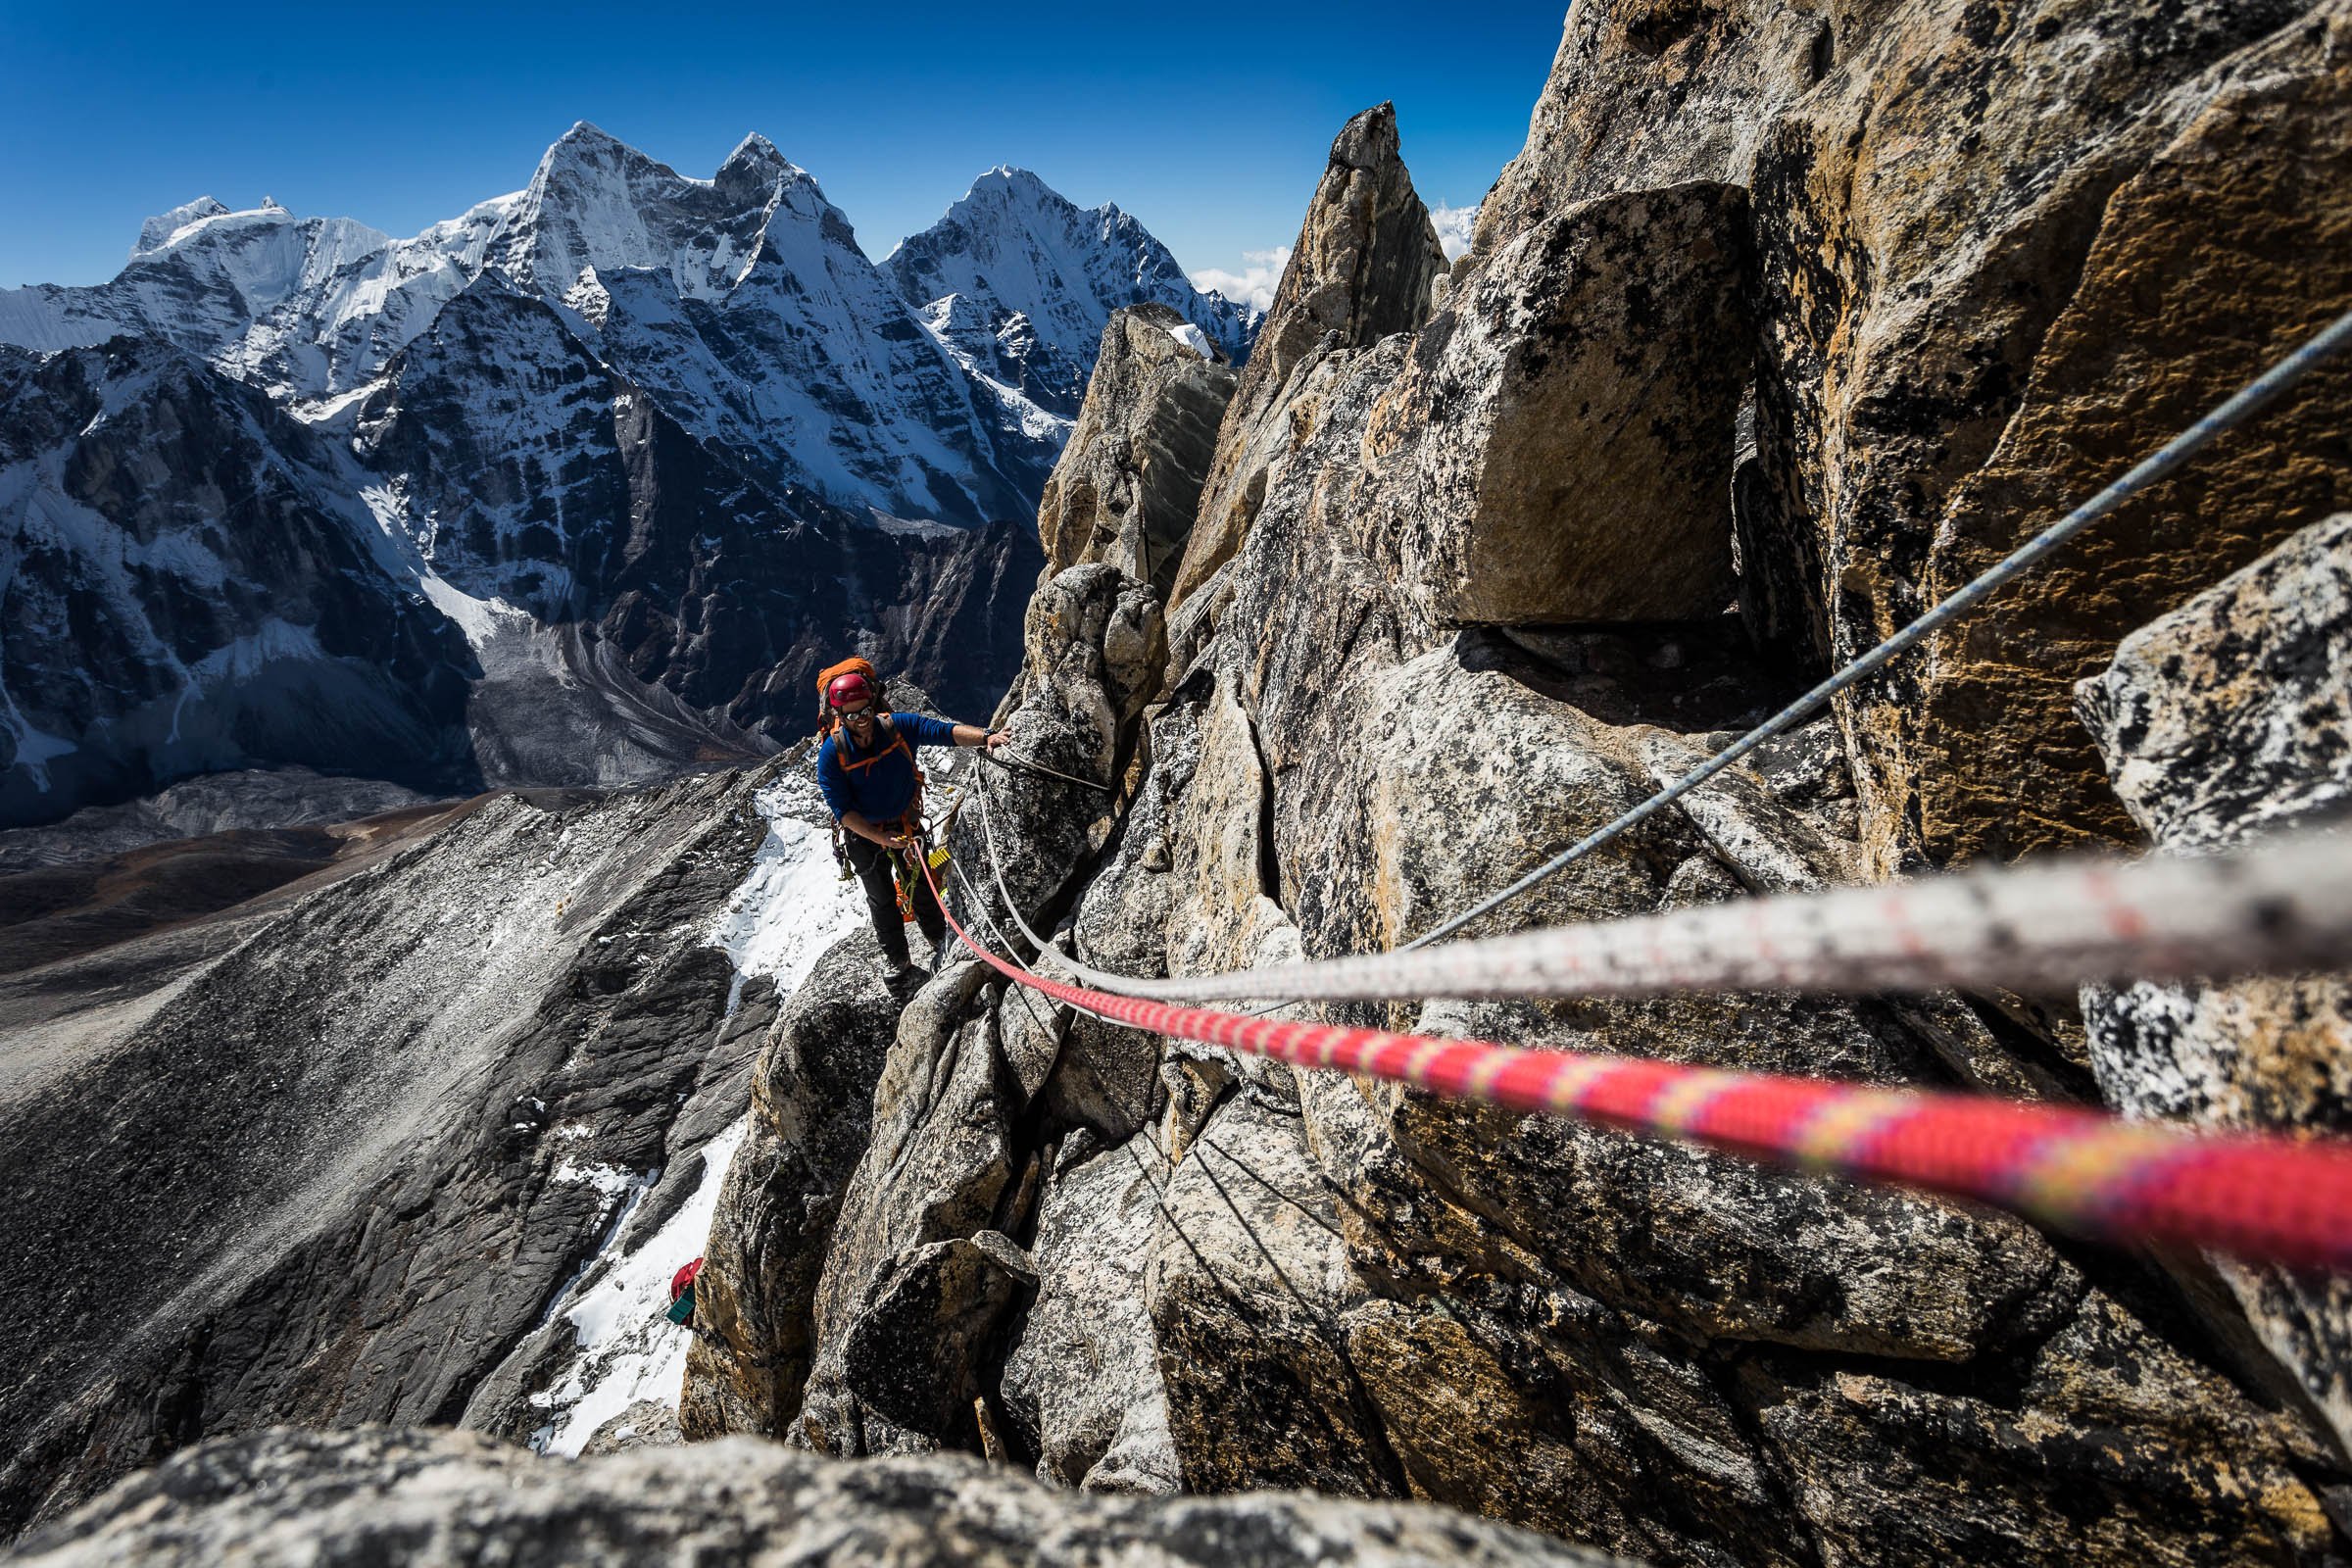 Technically challenging commercial peak expeditions below 8000M to